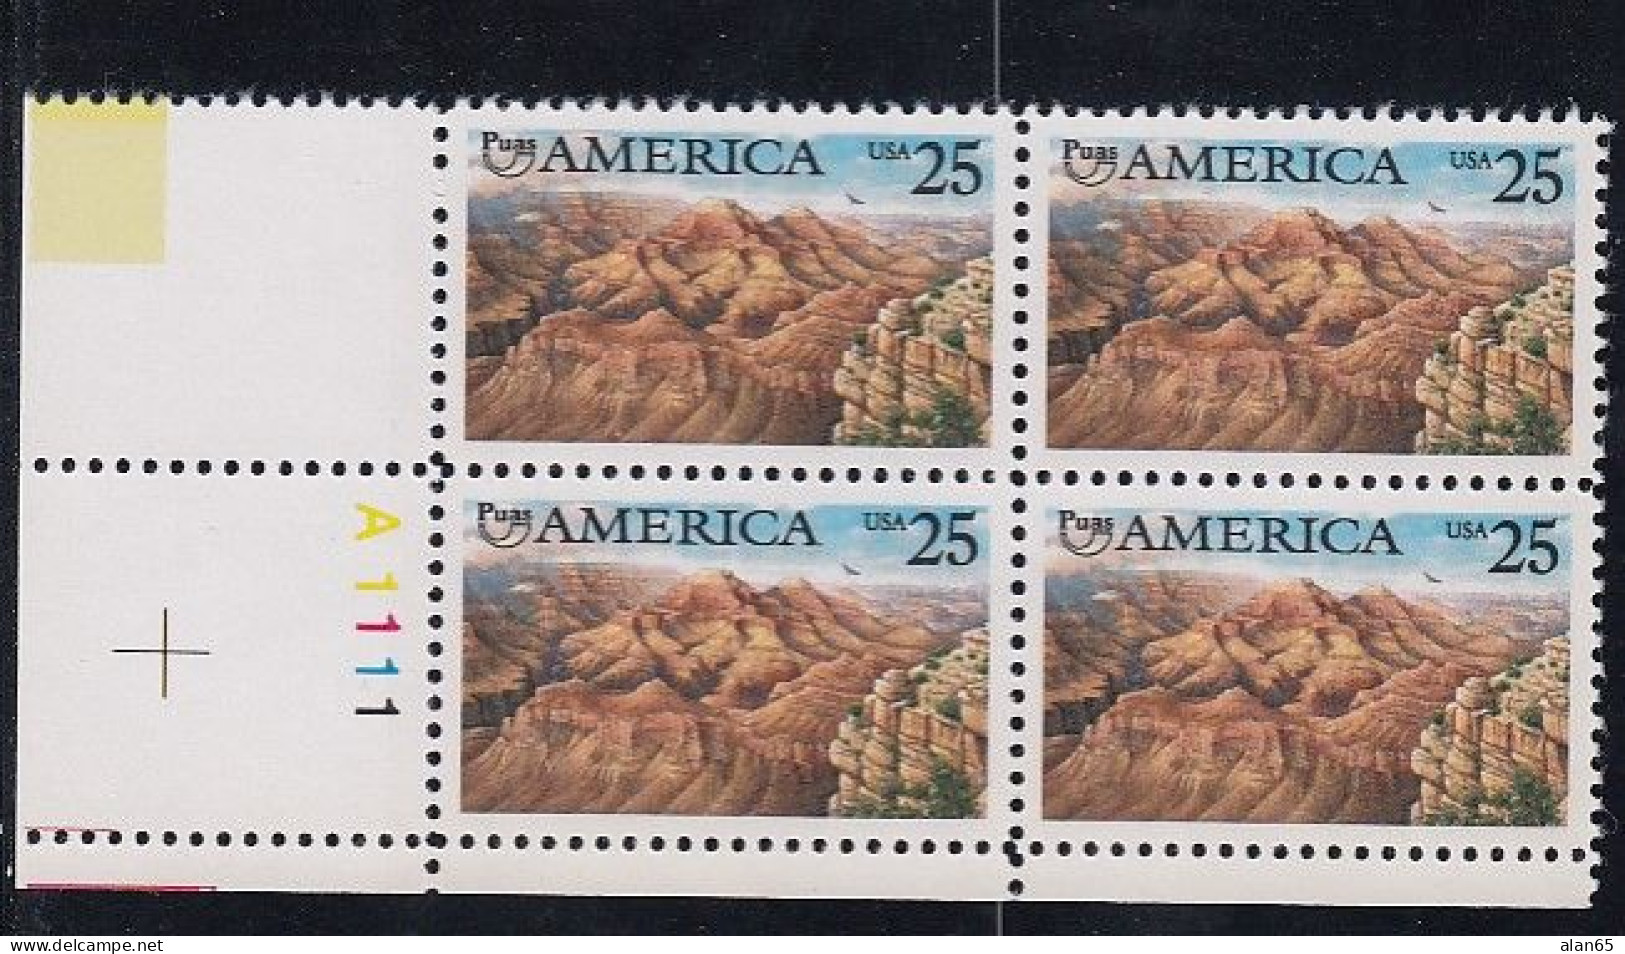 Sc#2512, Pre-Columbian America, Grand Canyon, 25-cent 1990 Issue, Plate # Block Of 4 MNH US Postage Stamps - Plattennummern